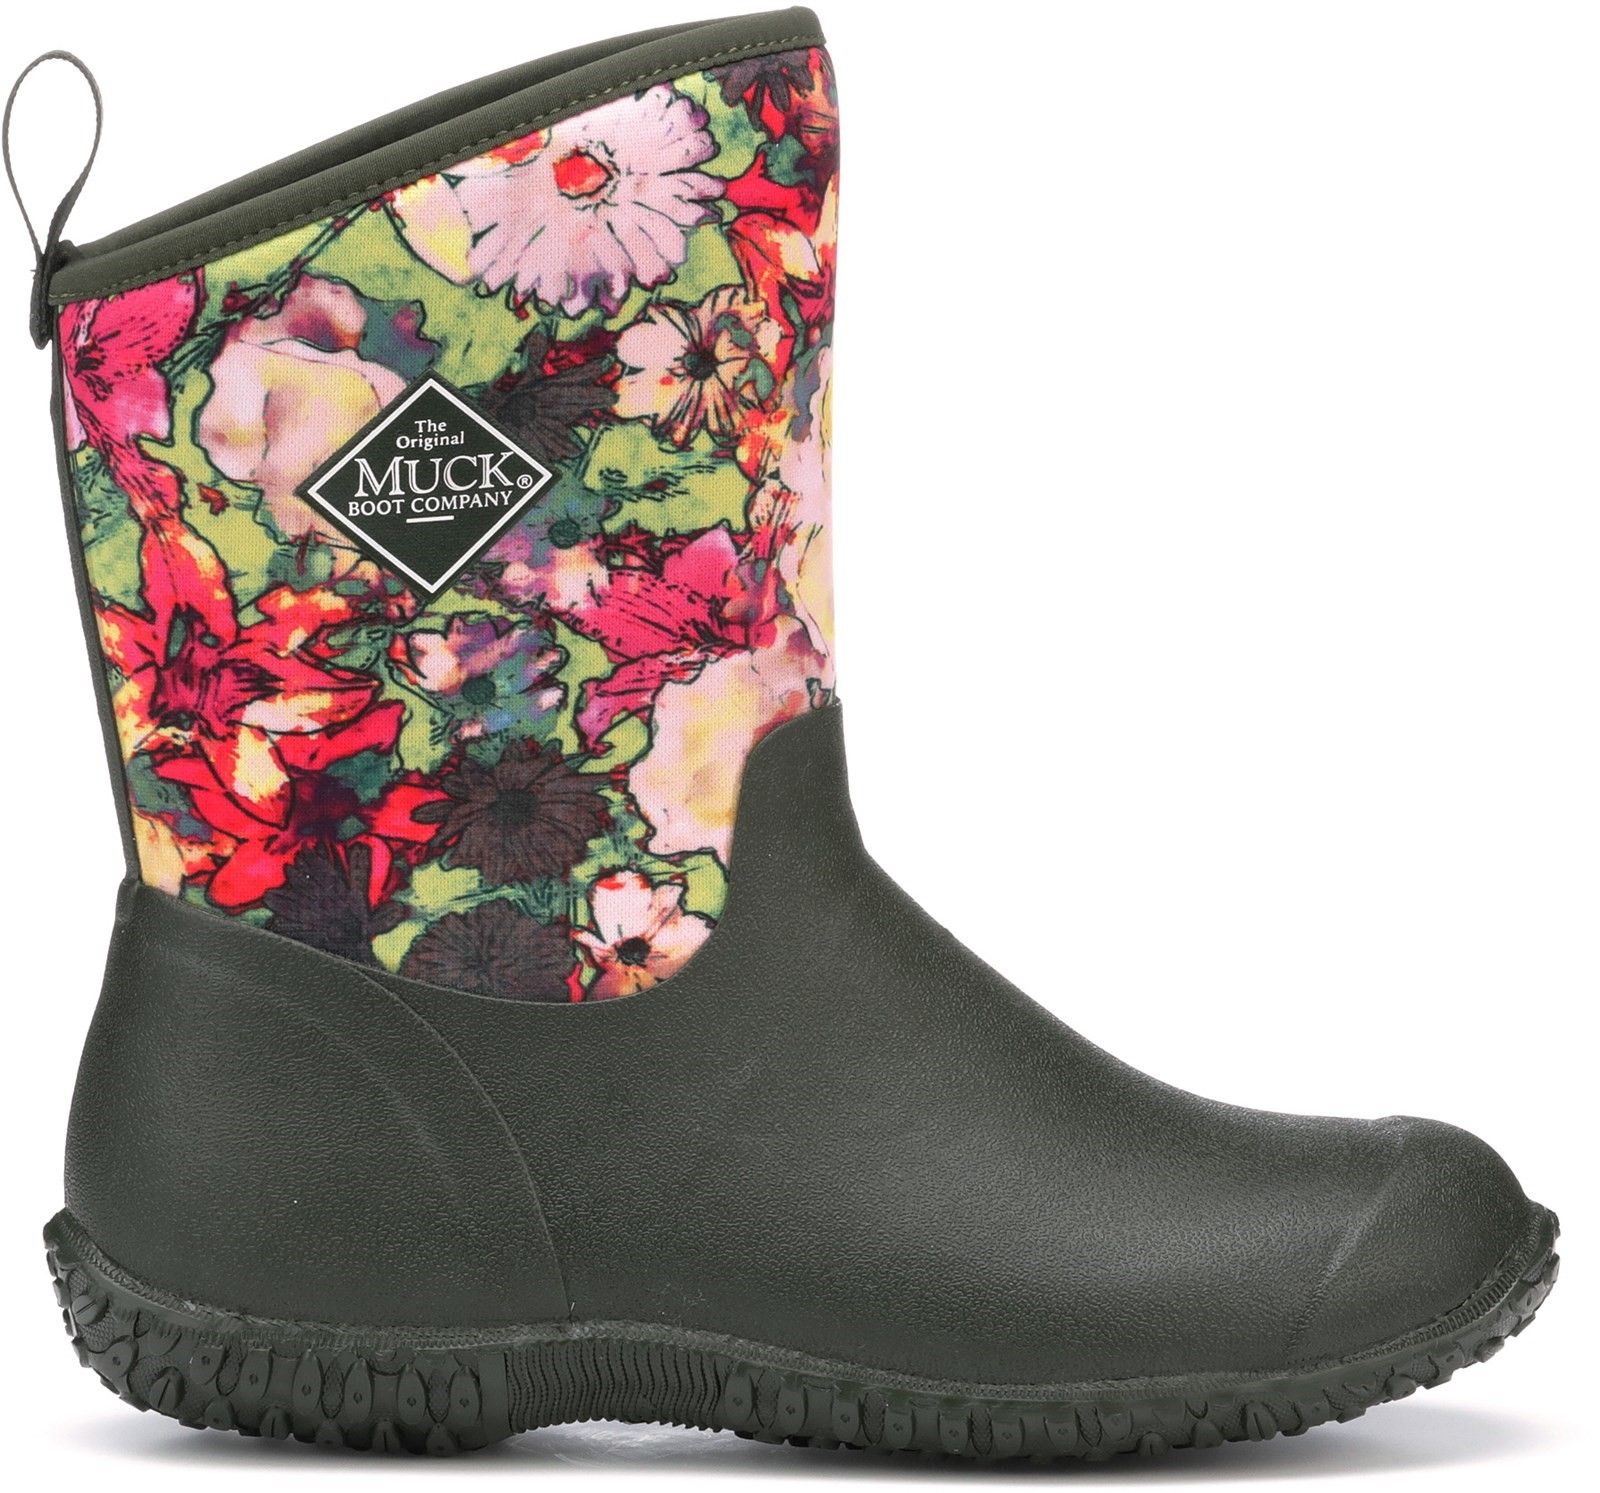 Ideal for the unpredictable British weather. 4mm neoprene can be rolled down and worn as an ankle boot. The high-traction rubber outsole holds in muddy conditions, along with breathable air mesh lining keeping your feet cool on warmer days.Womens Waterproof Mid Cut Utility Garden Boot. 
Neoprene Bootie Construction for Comfort and Warmth. 
Fold Down Versatility.